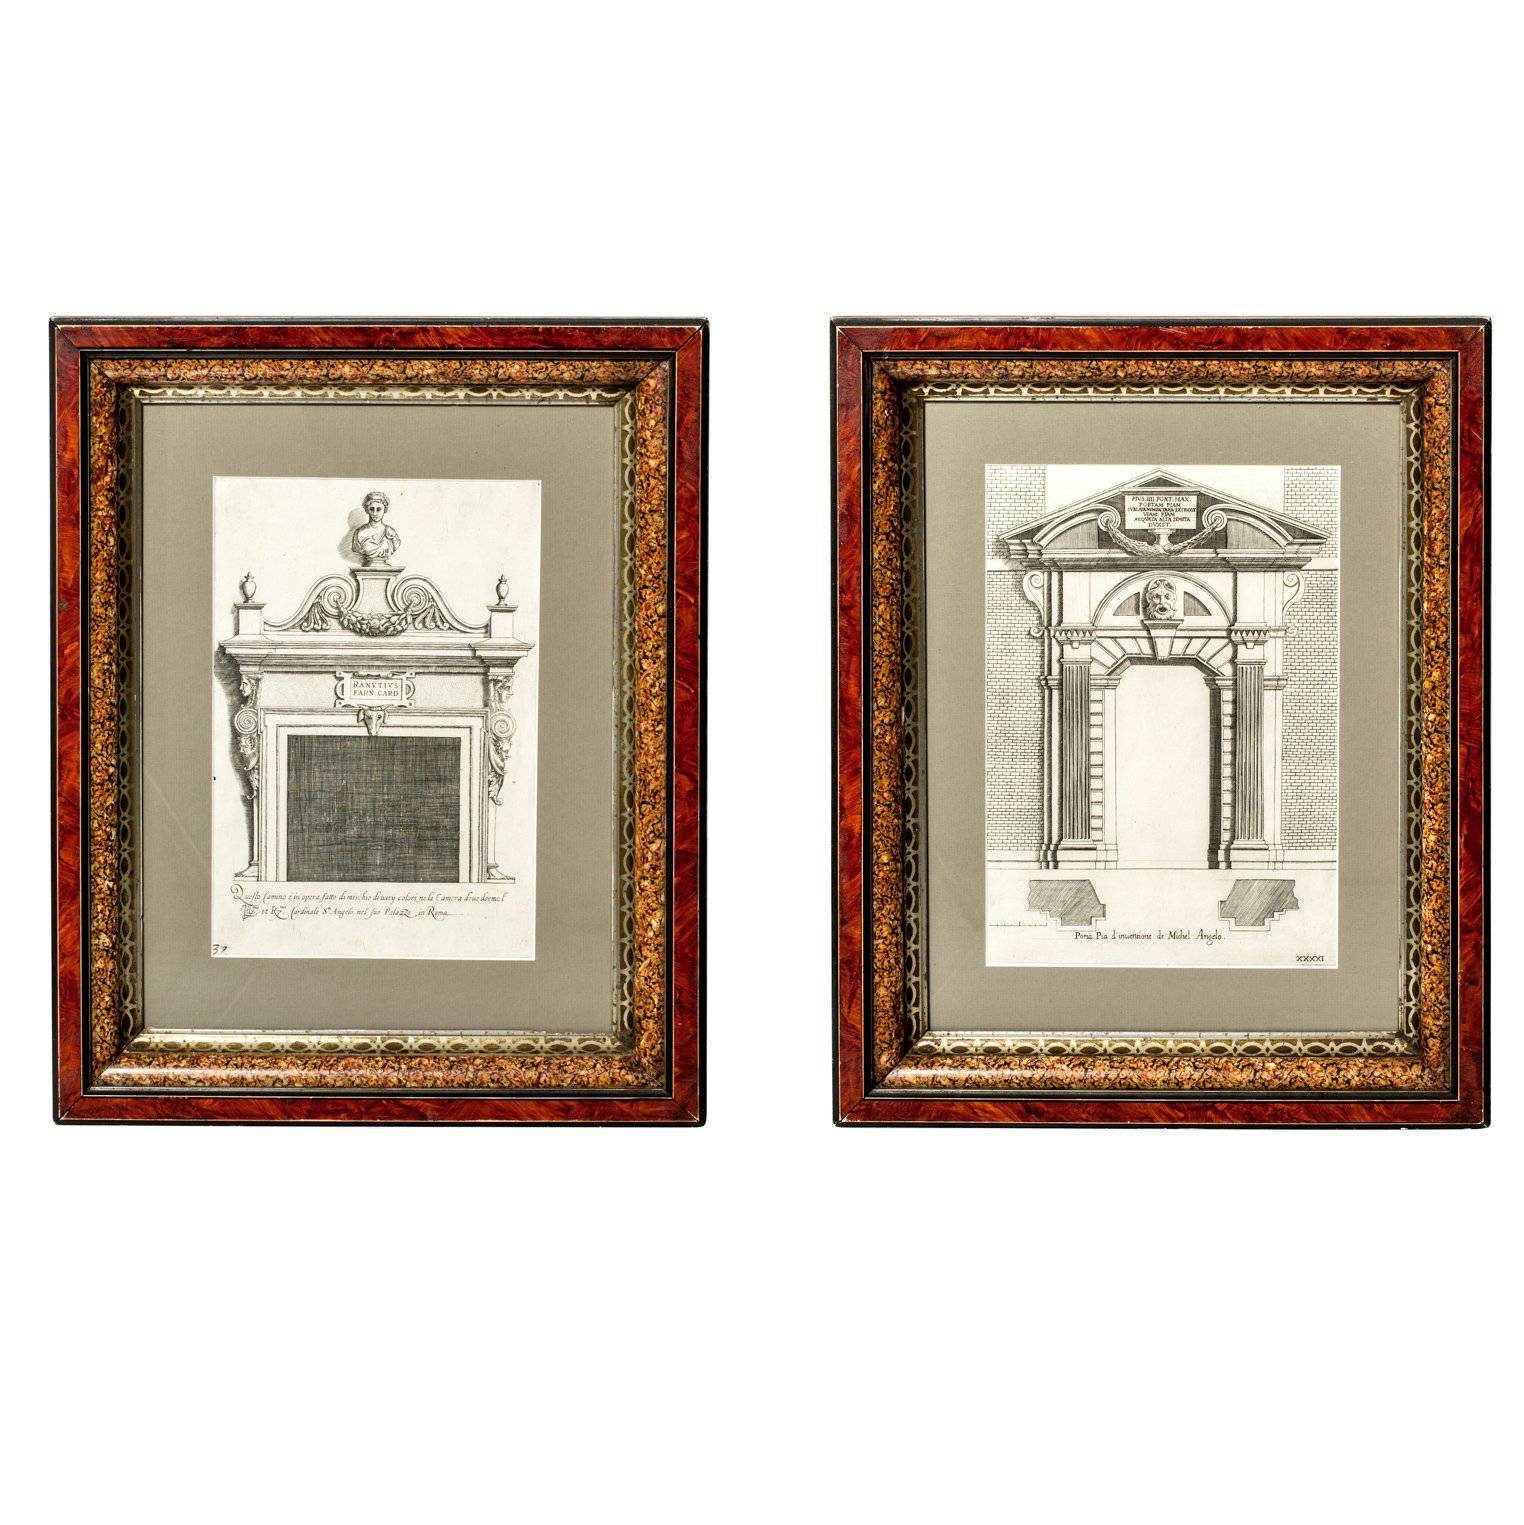 Framed Architectural Engravings For Sale